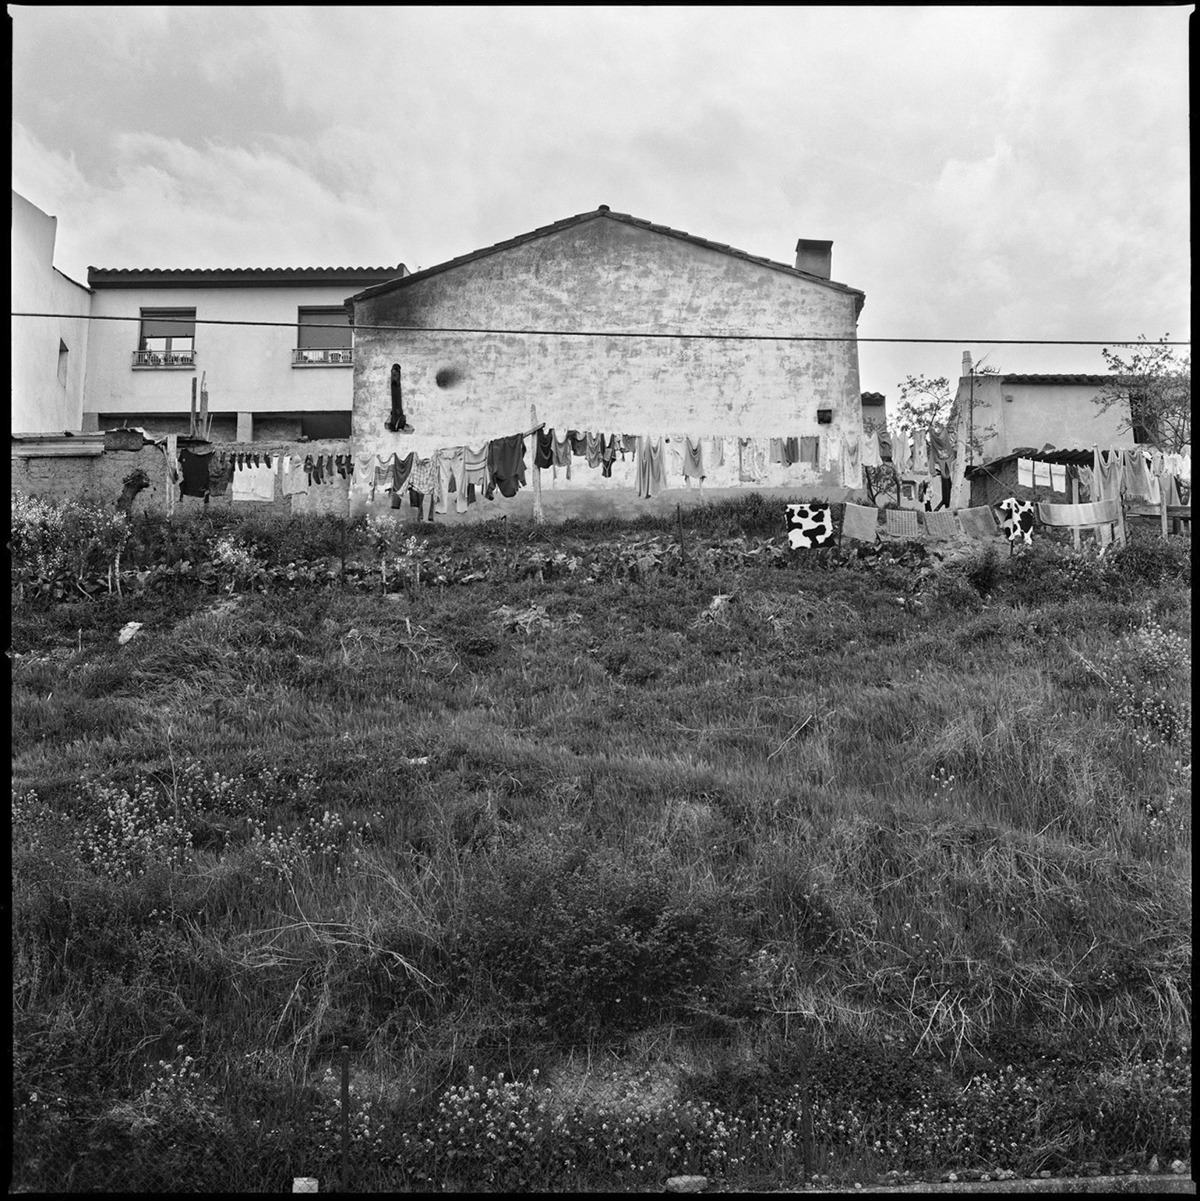 Landscape Hasselblad Documentary  etnography folk art landscape photography film photography spain square format analog photography land art agriculture b&w black and white Architecture Photography